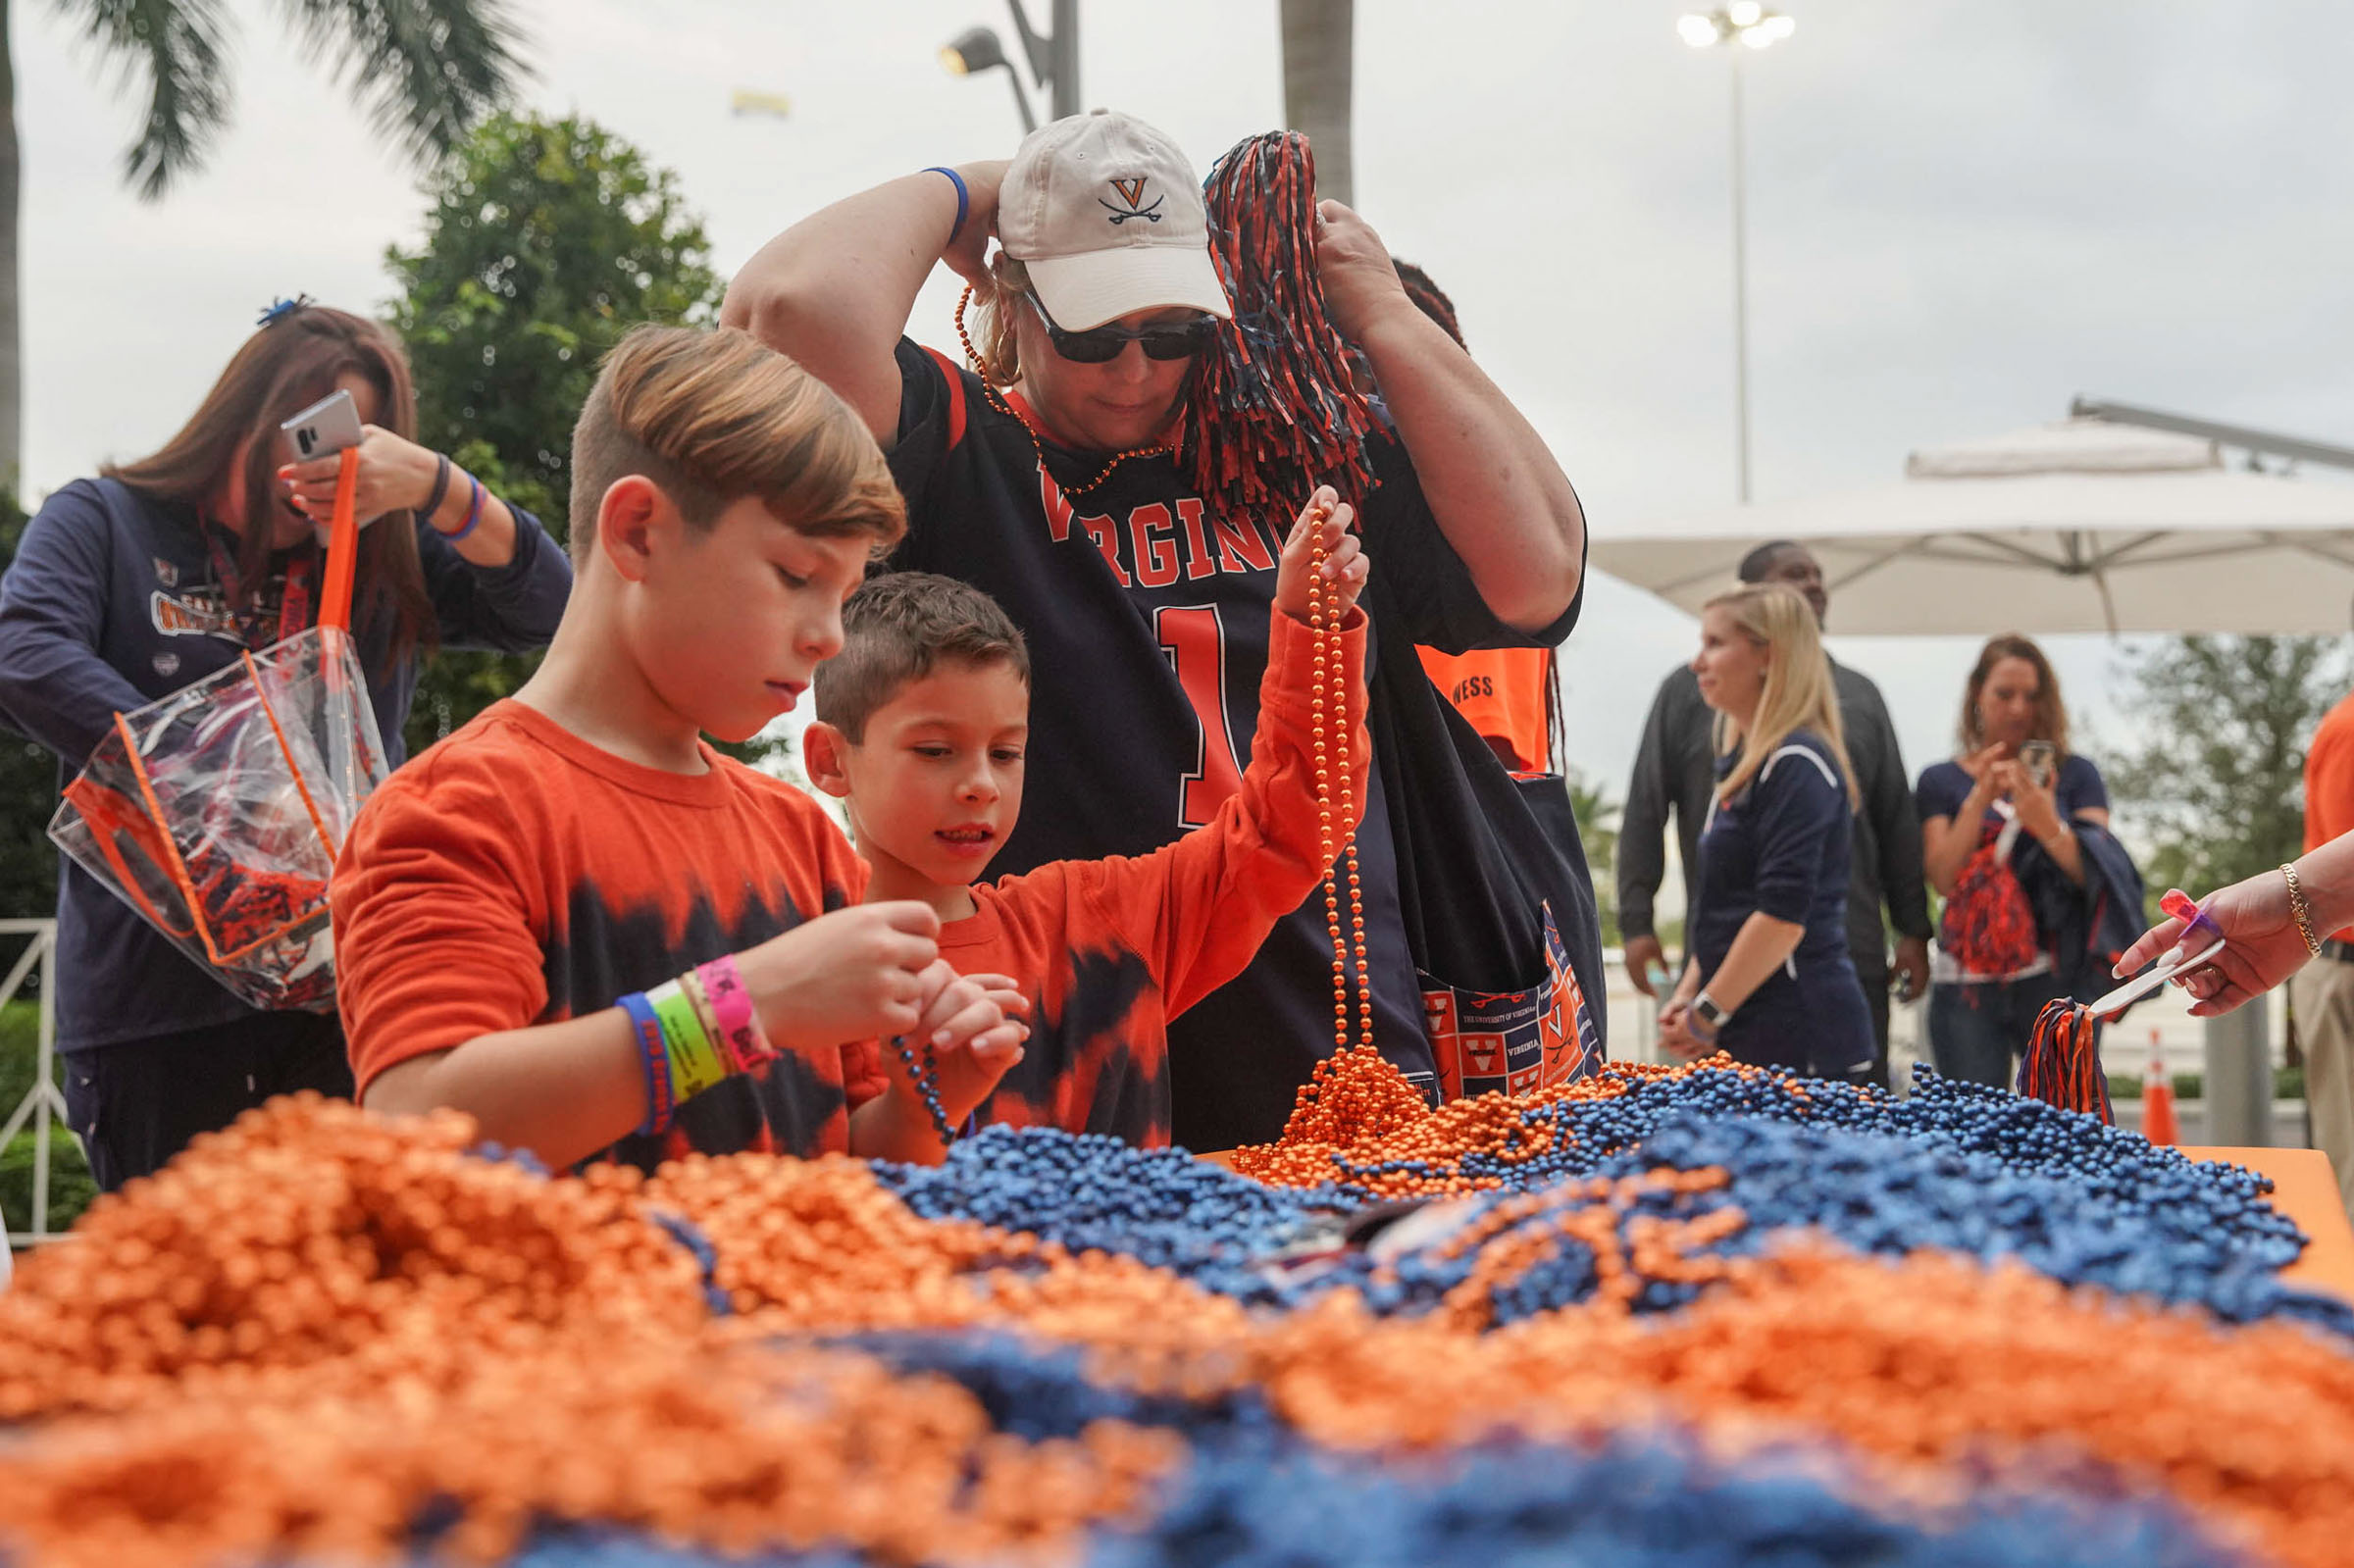 UVA fans at a table picking up blue and orange beads